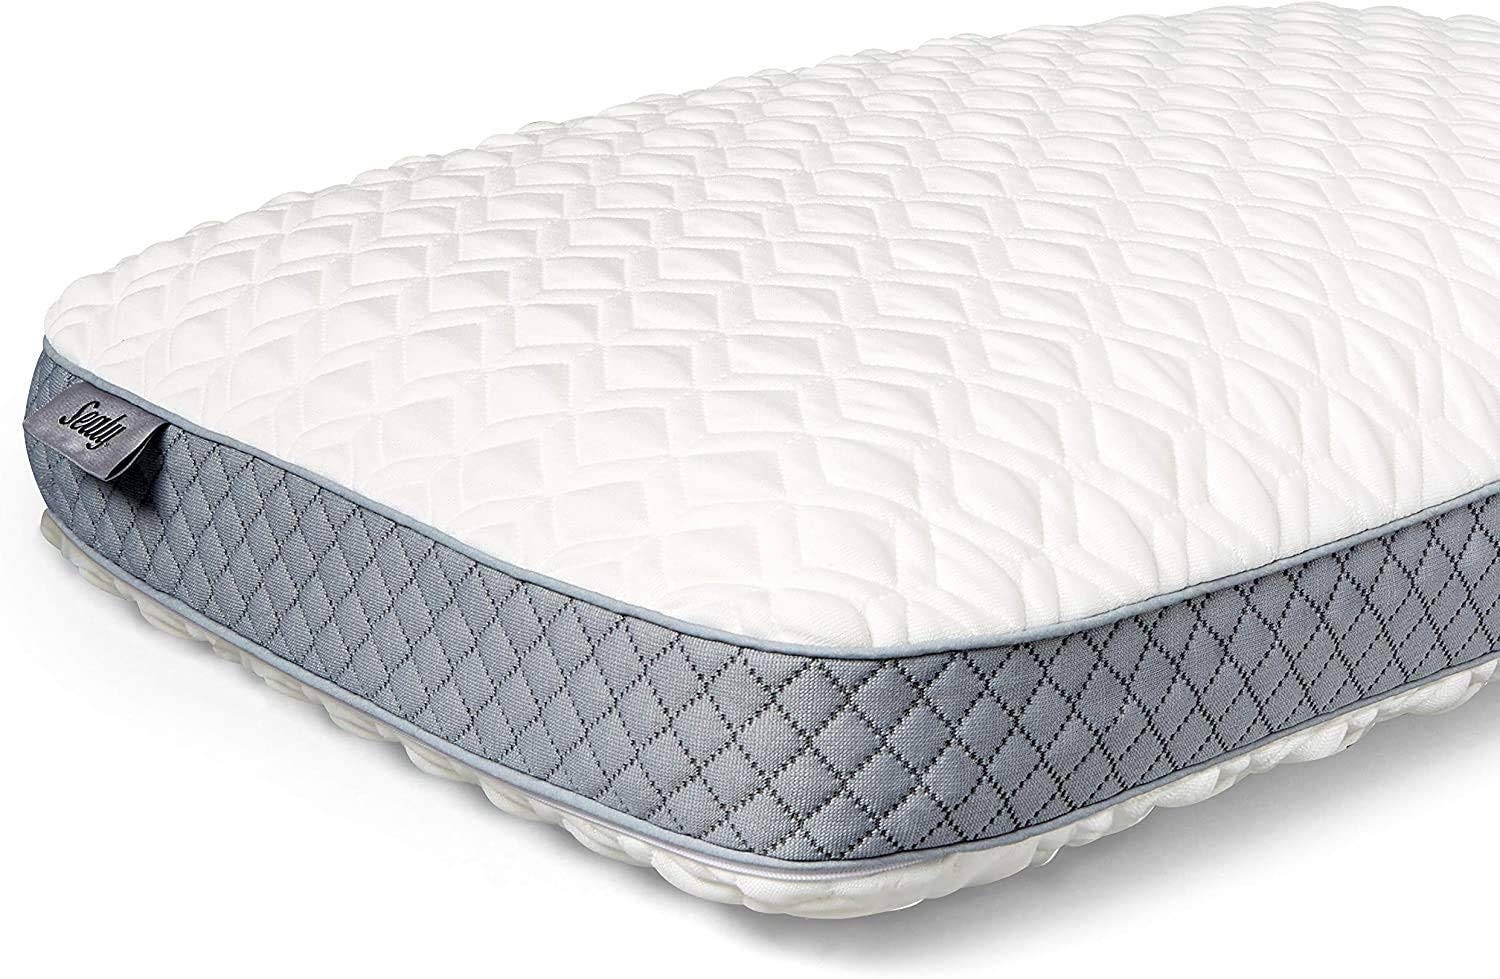 Sealy Memory Foam Bed Pillow with Plush Knit Cover - Perfect for Twin or Double Beds | Image